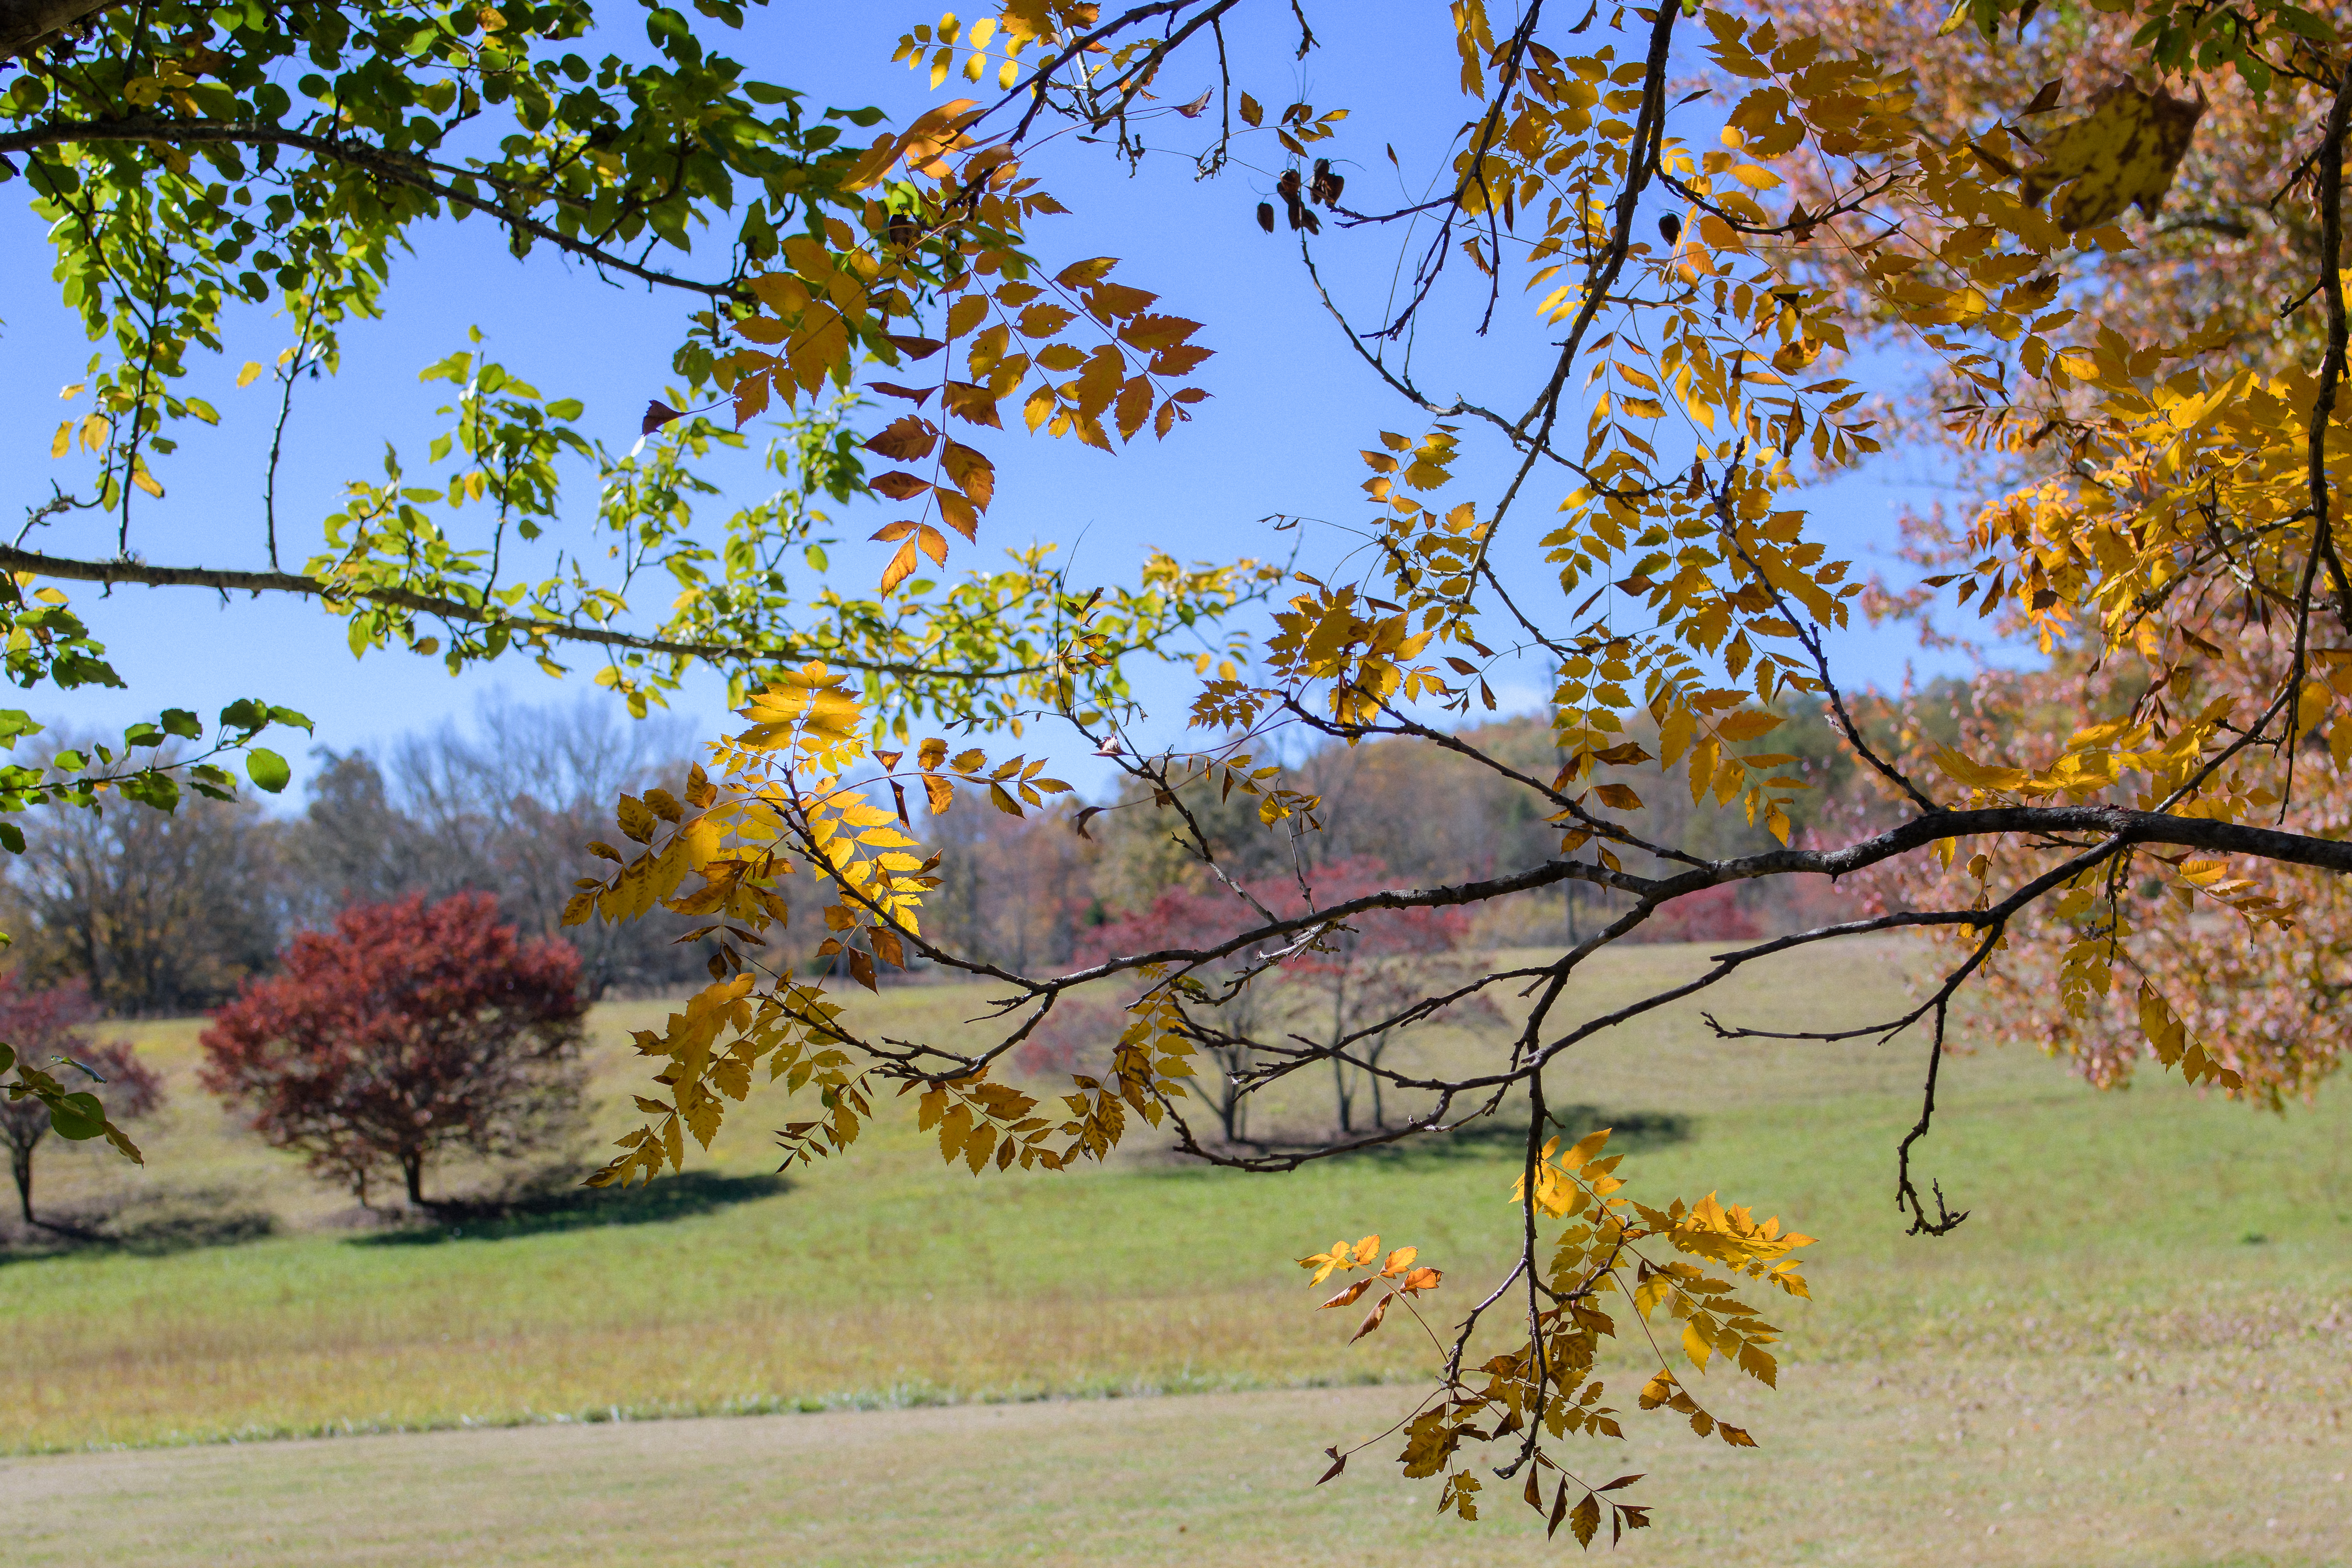 Yellow leaves in front of a landscape of green fields with red-leaved trees in the backdrop